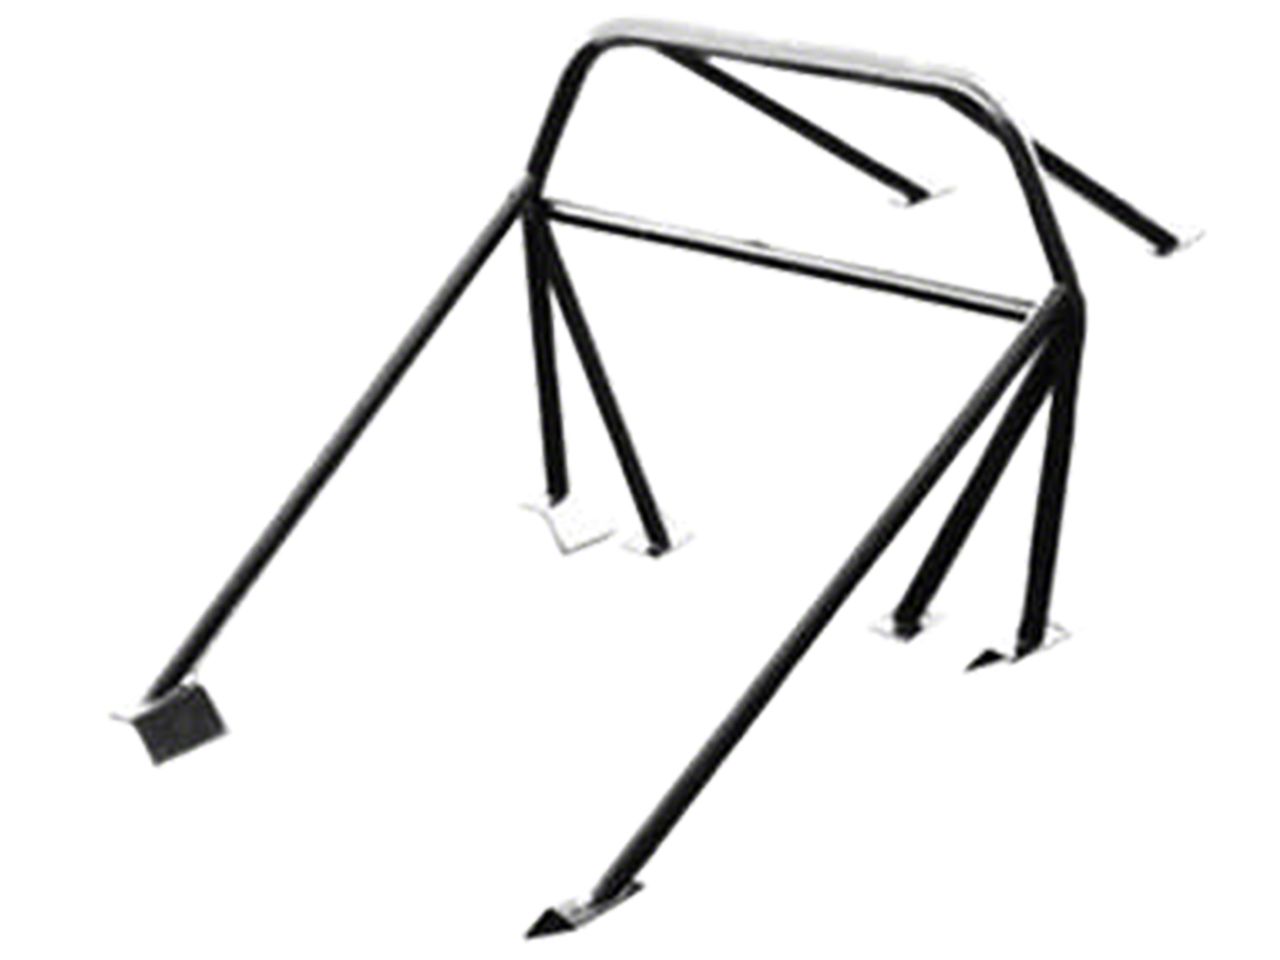 Camaro Roll Bars & Roll Cages 1967-1969